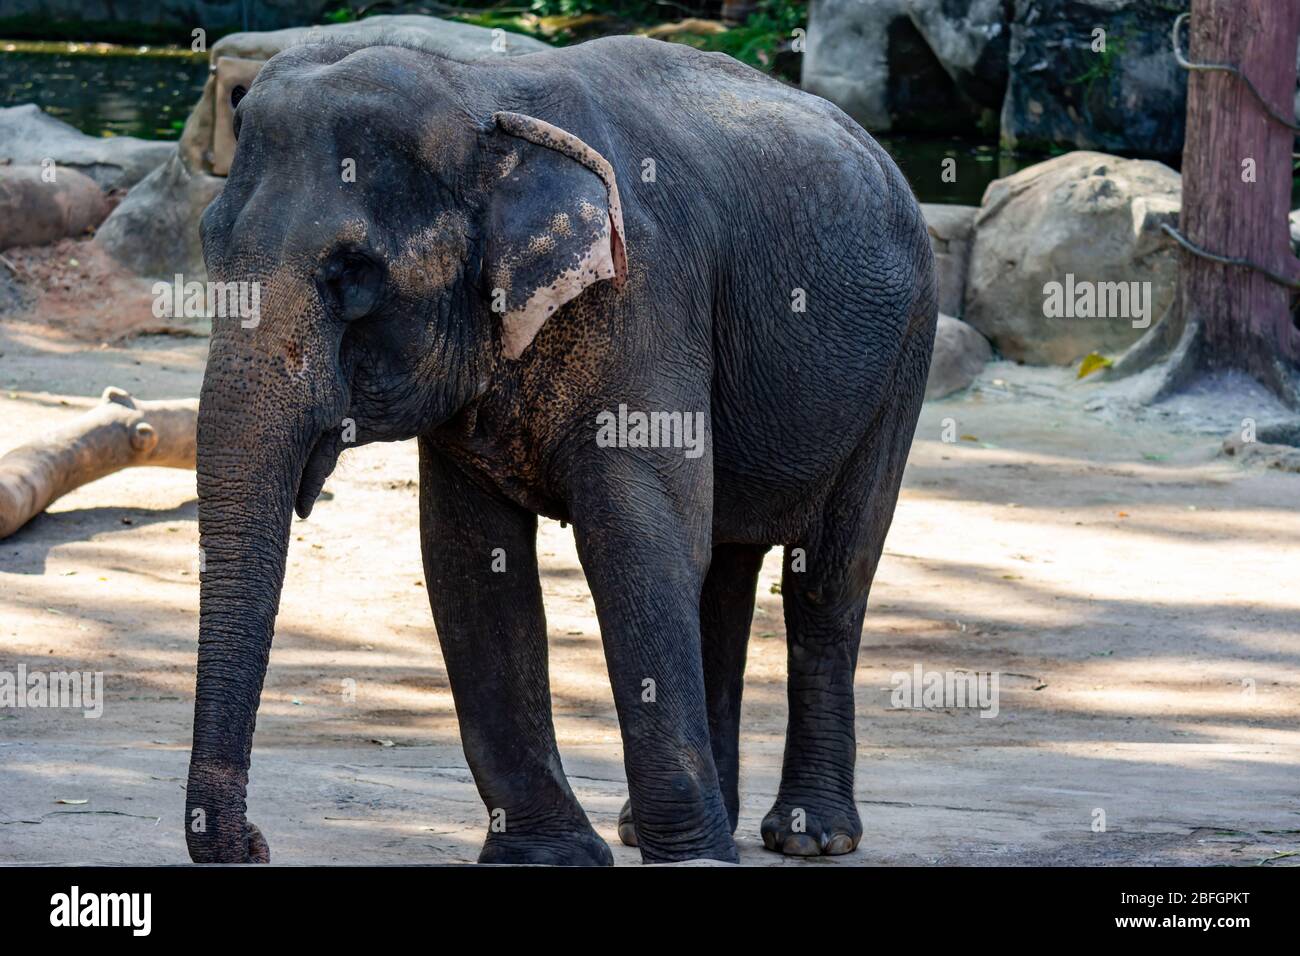 The Asian elephant, also called Asiatic elephant, is the only living species of the genus Elephas and is distributed throughout the Indian subcontinen Stock Photo